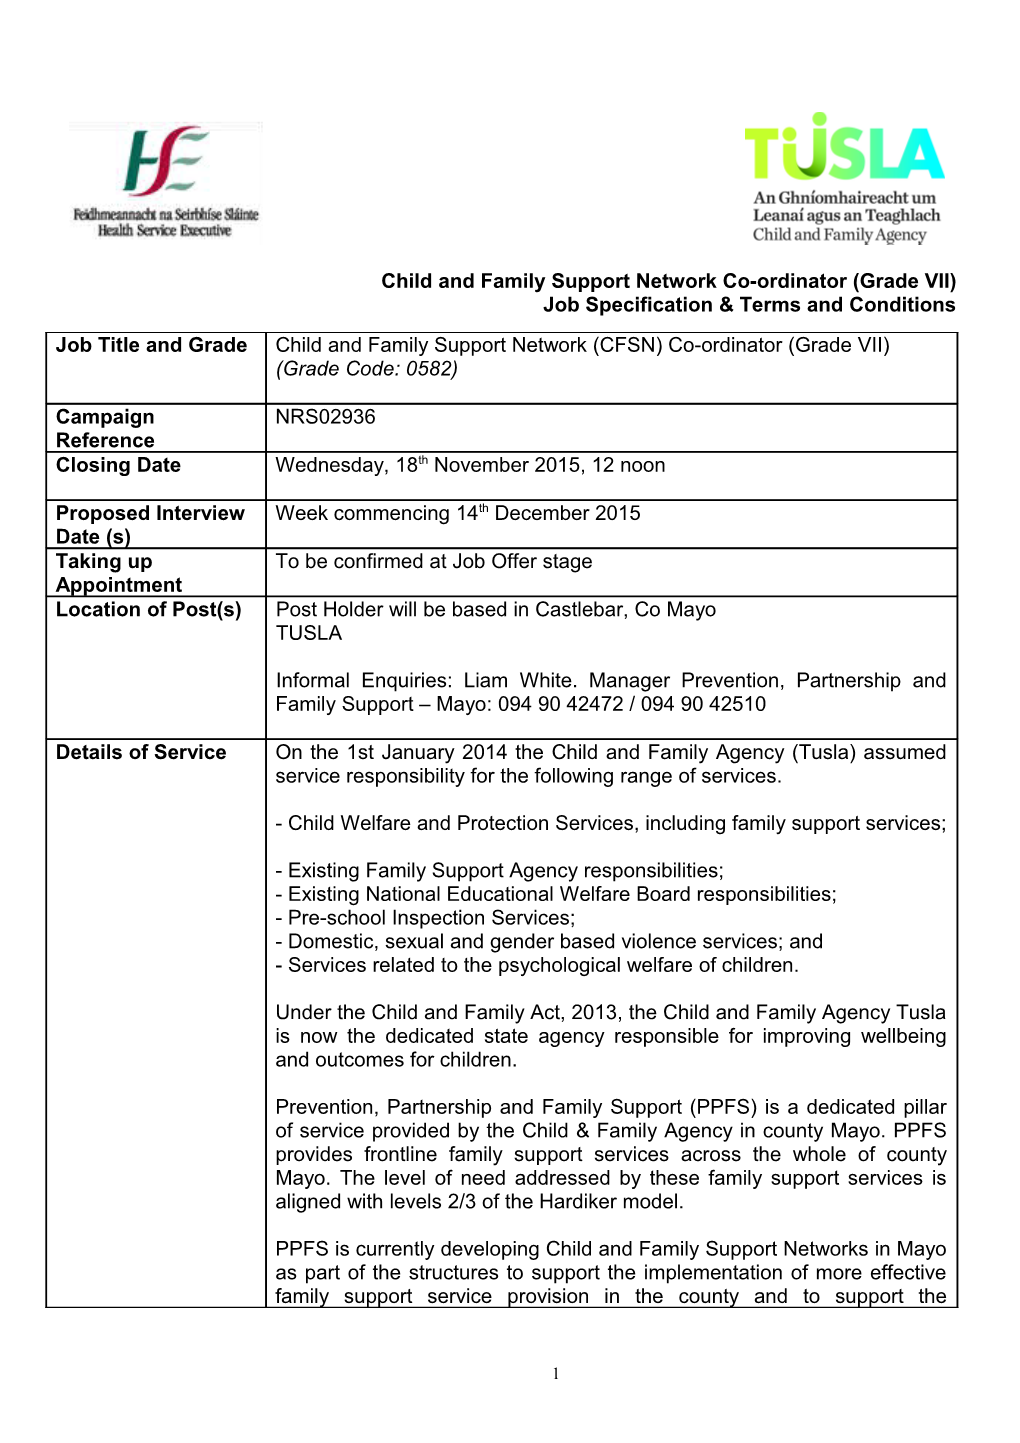 Child and Family Support Network Co-Ordinator (Grade VII)